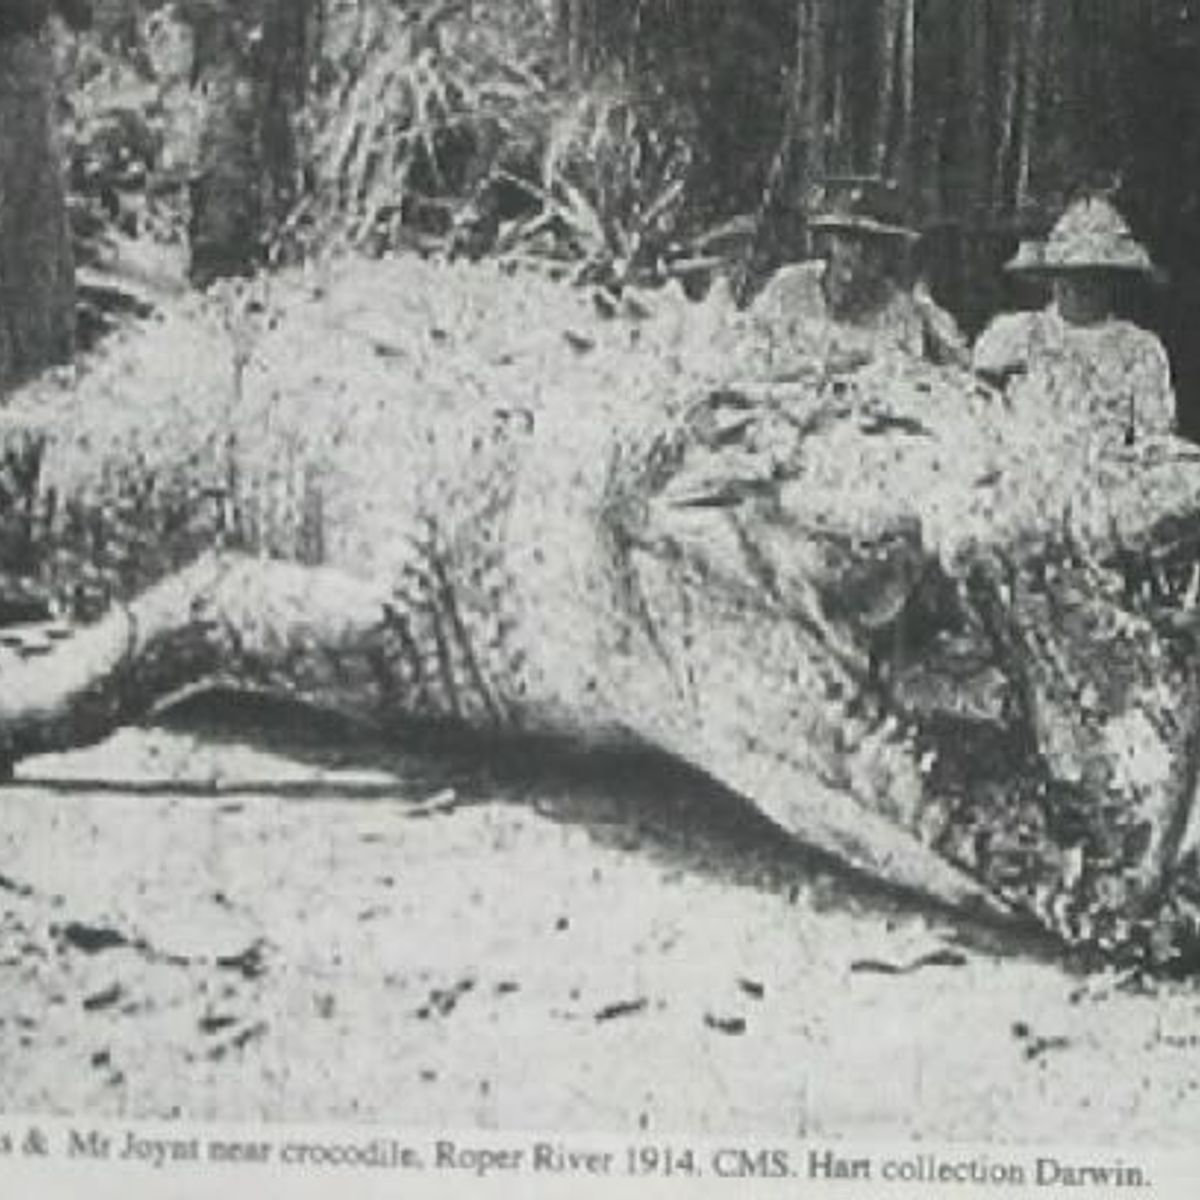 This a 28-Foot-Long Crocodile That Was Killed in Australia in 1957? | Snopes.com